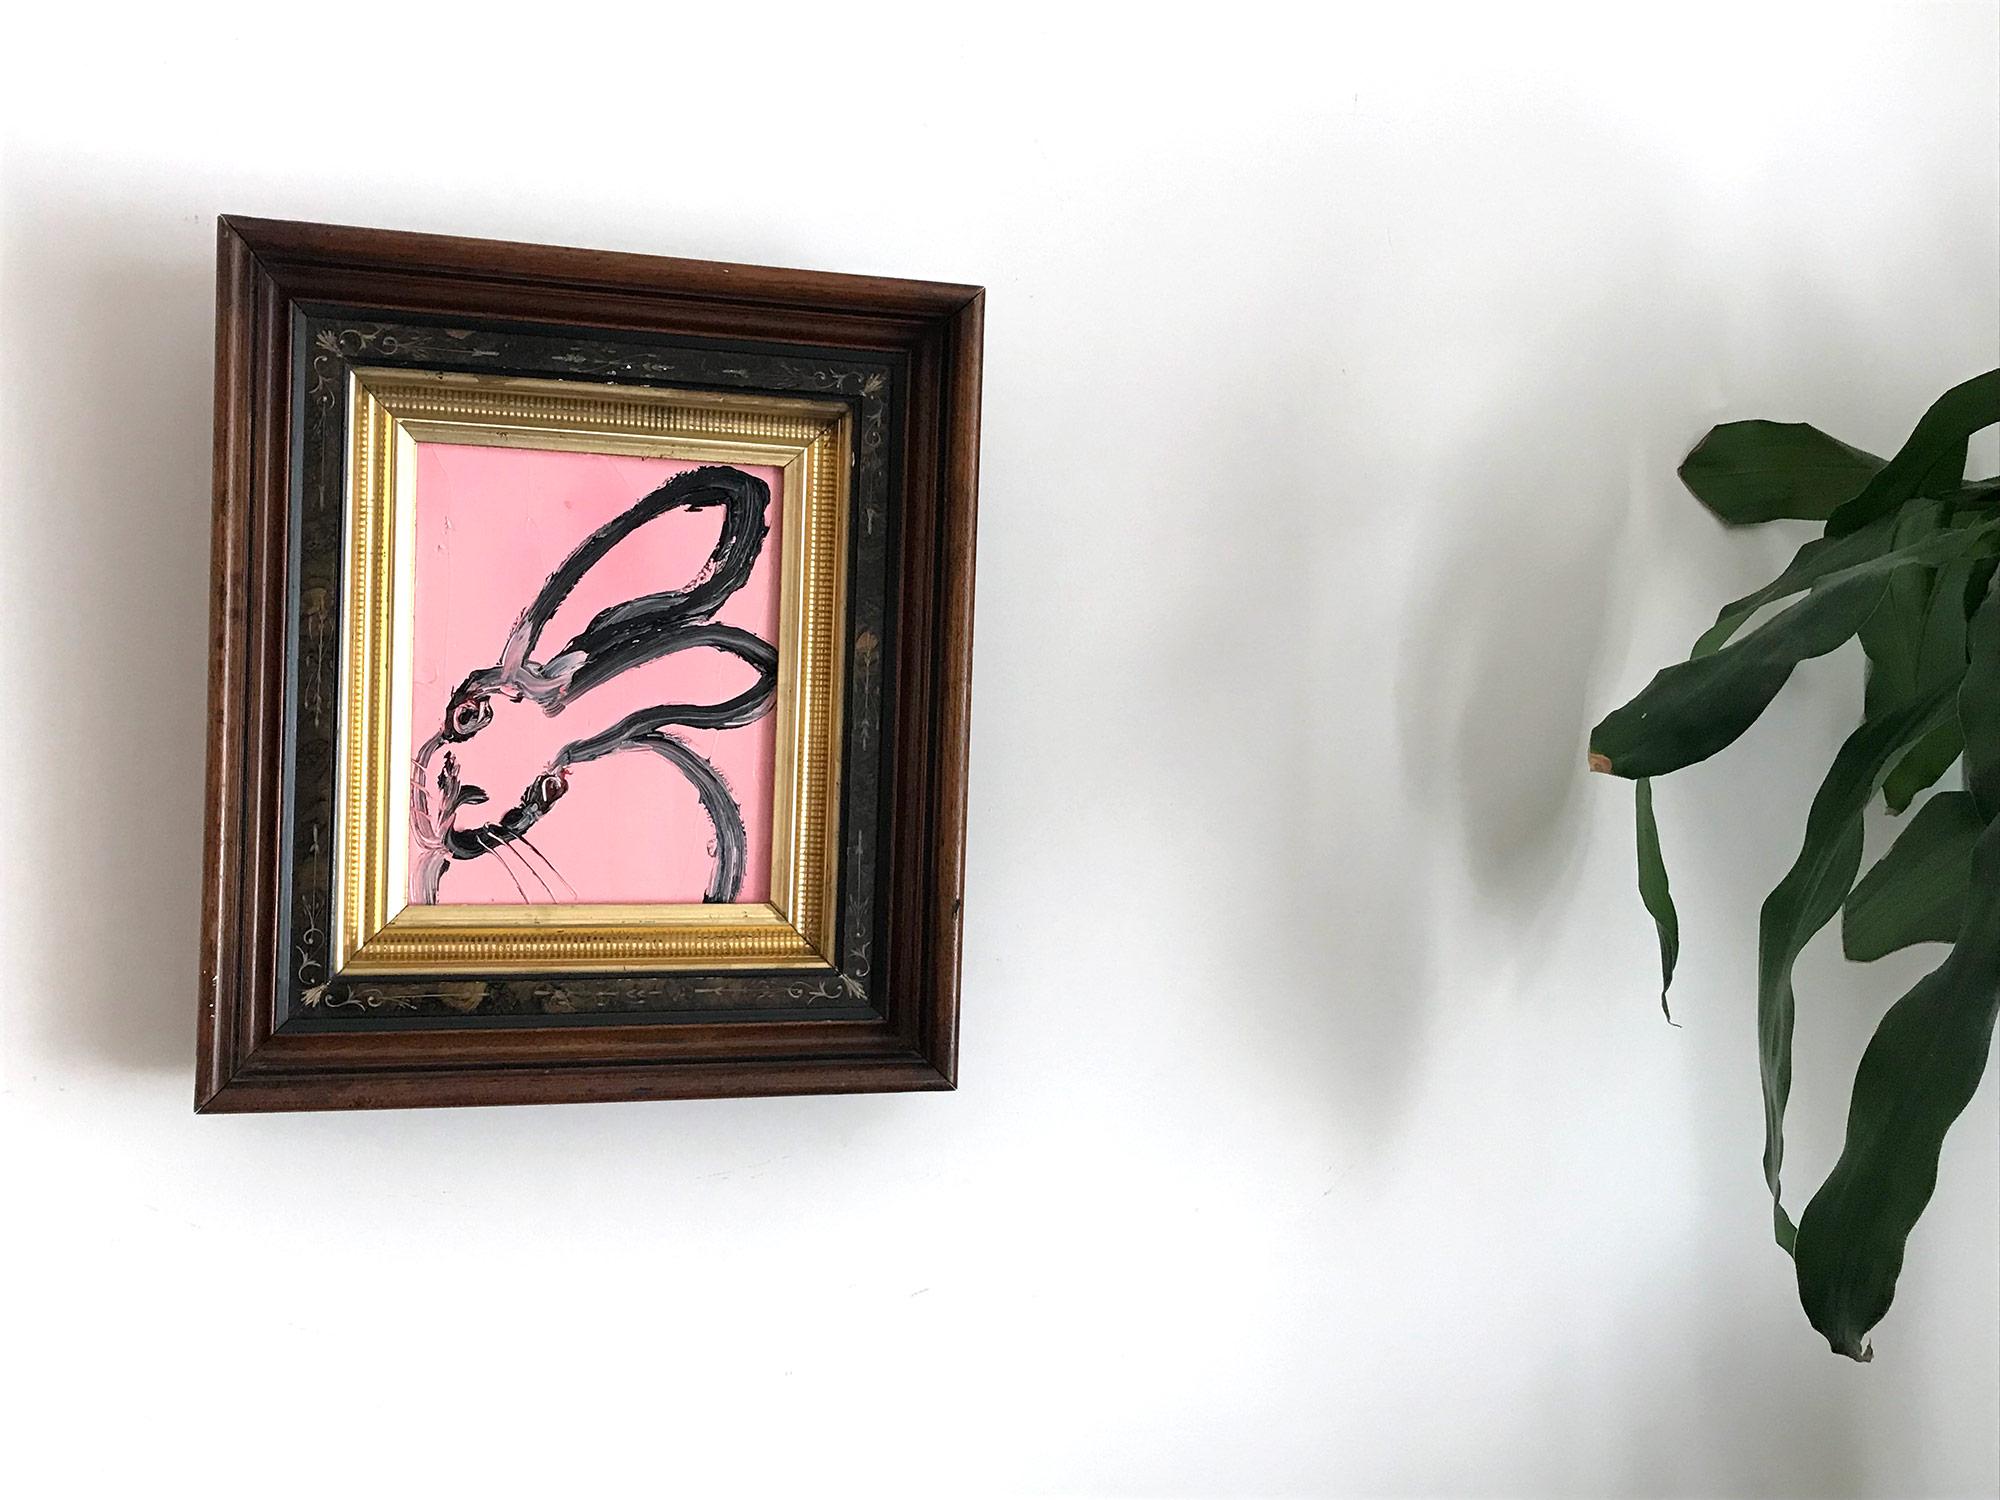 A wonderful composition of one of Slonem's most iconic subjects, Bunnies. This piece depicts a gestural figure of a black bunny on a Flamingo Pink background with thick use of paint. It is housed in a wonderful antique 19th Century frame. Inspired